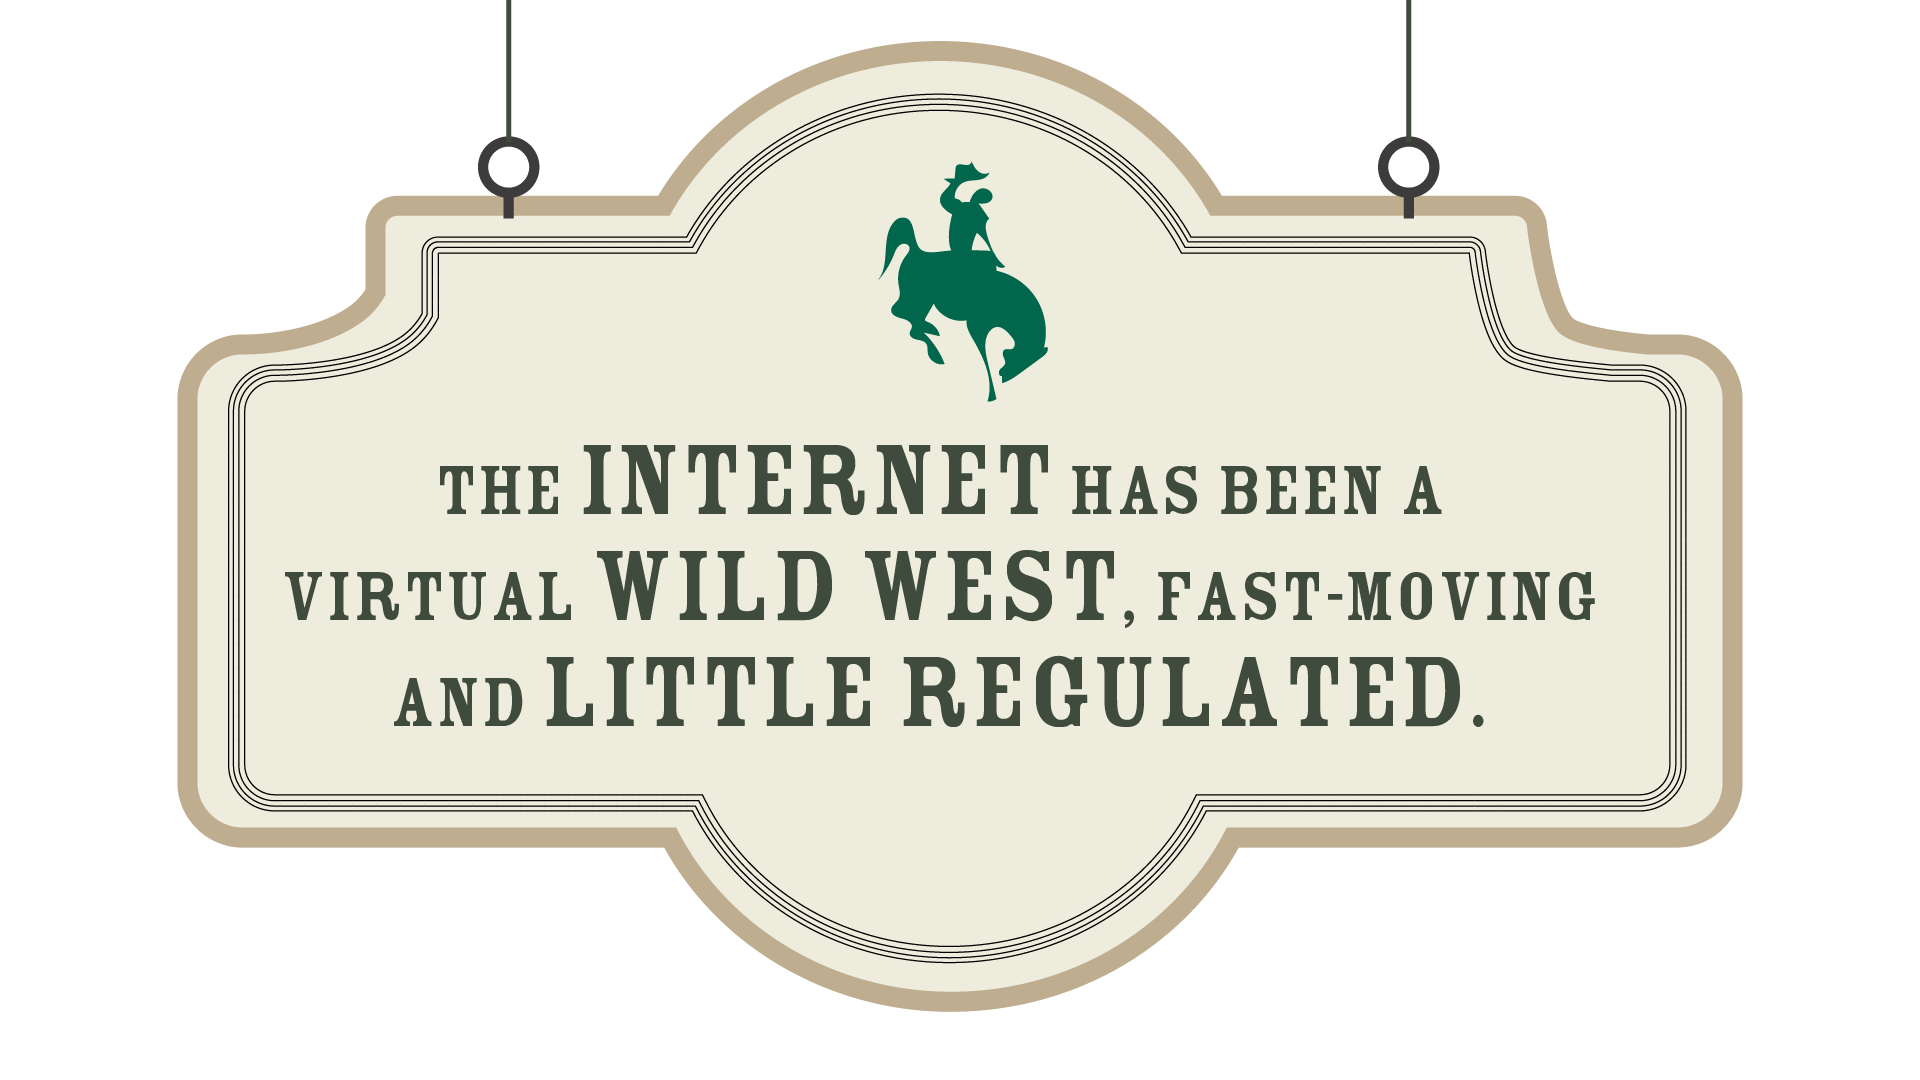 “The internet has been a virtual wild west, fast-moving and little regulated.” - quote on content quality on a Western saloon sign